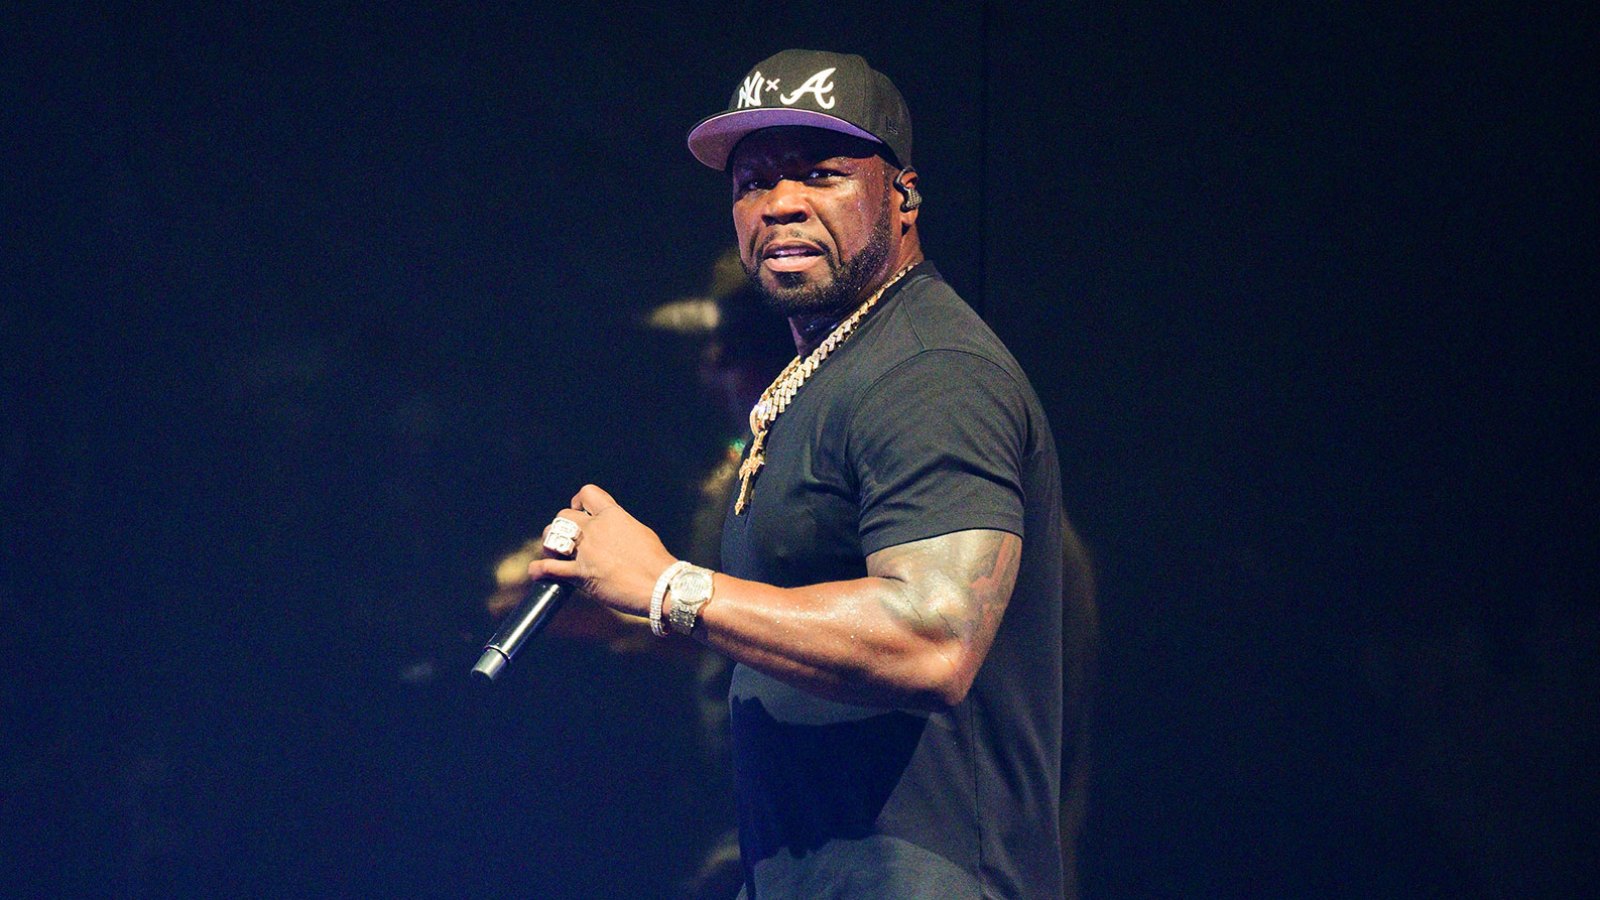 50 Cent Named Suspect for Criminal Battery After Allegedly Hitting Concertgoer With Microphone